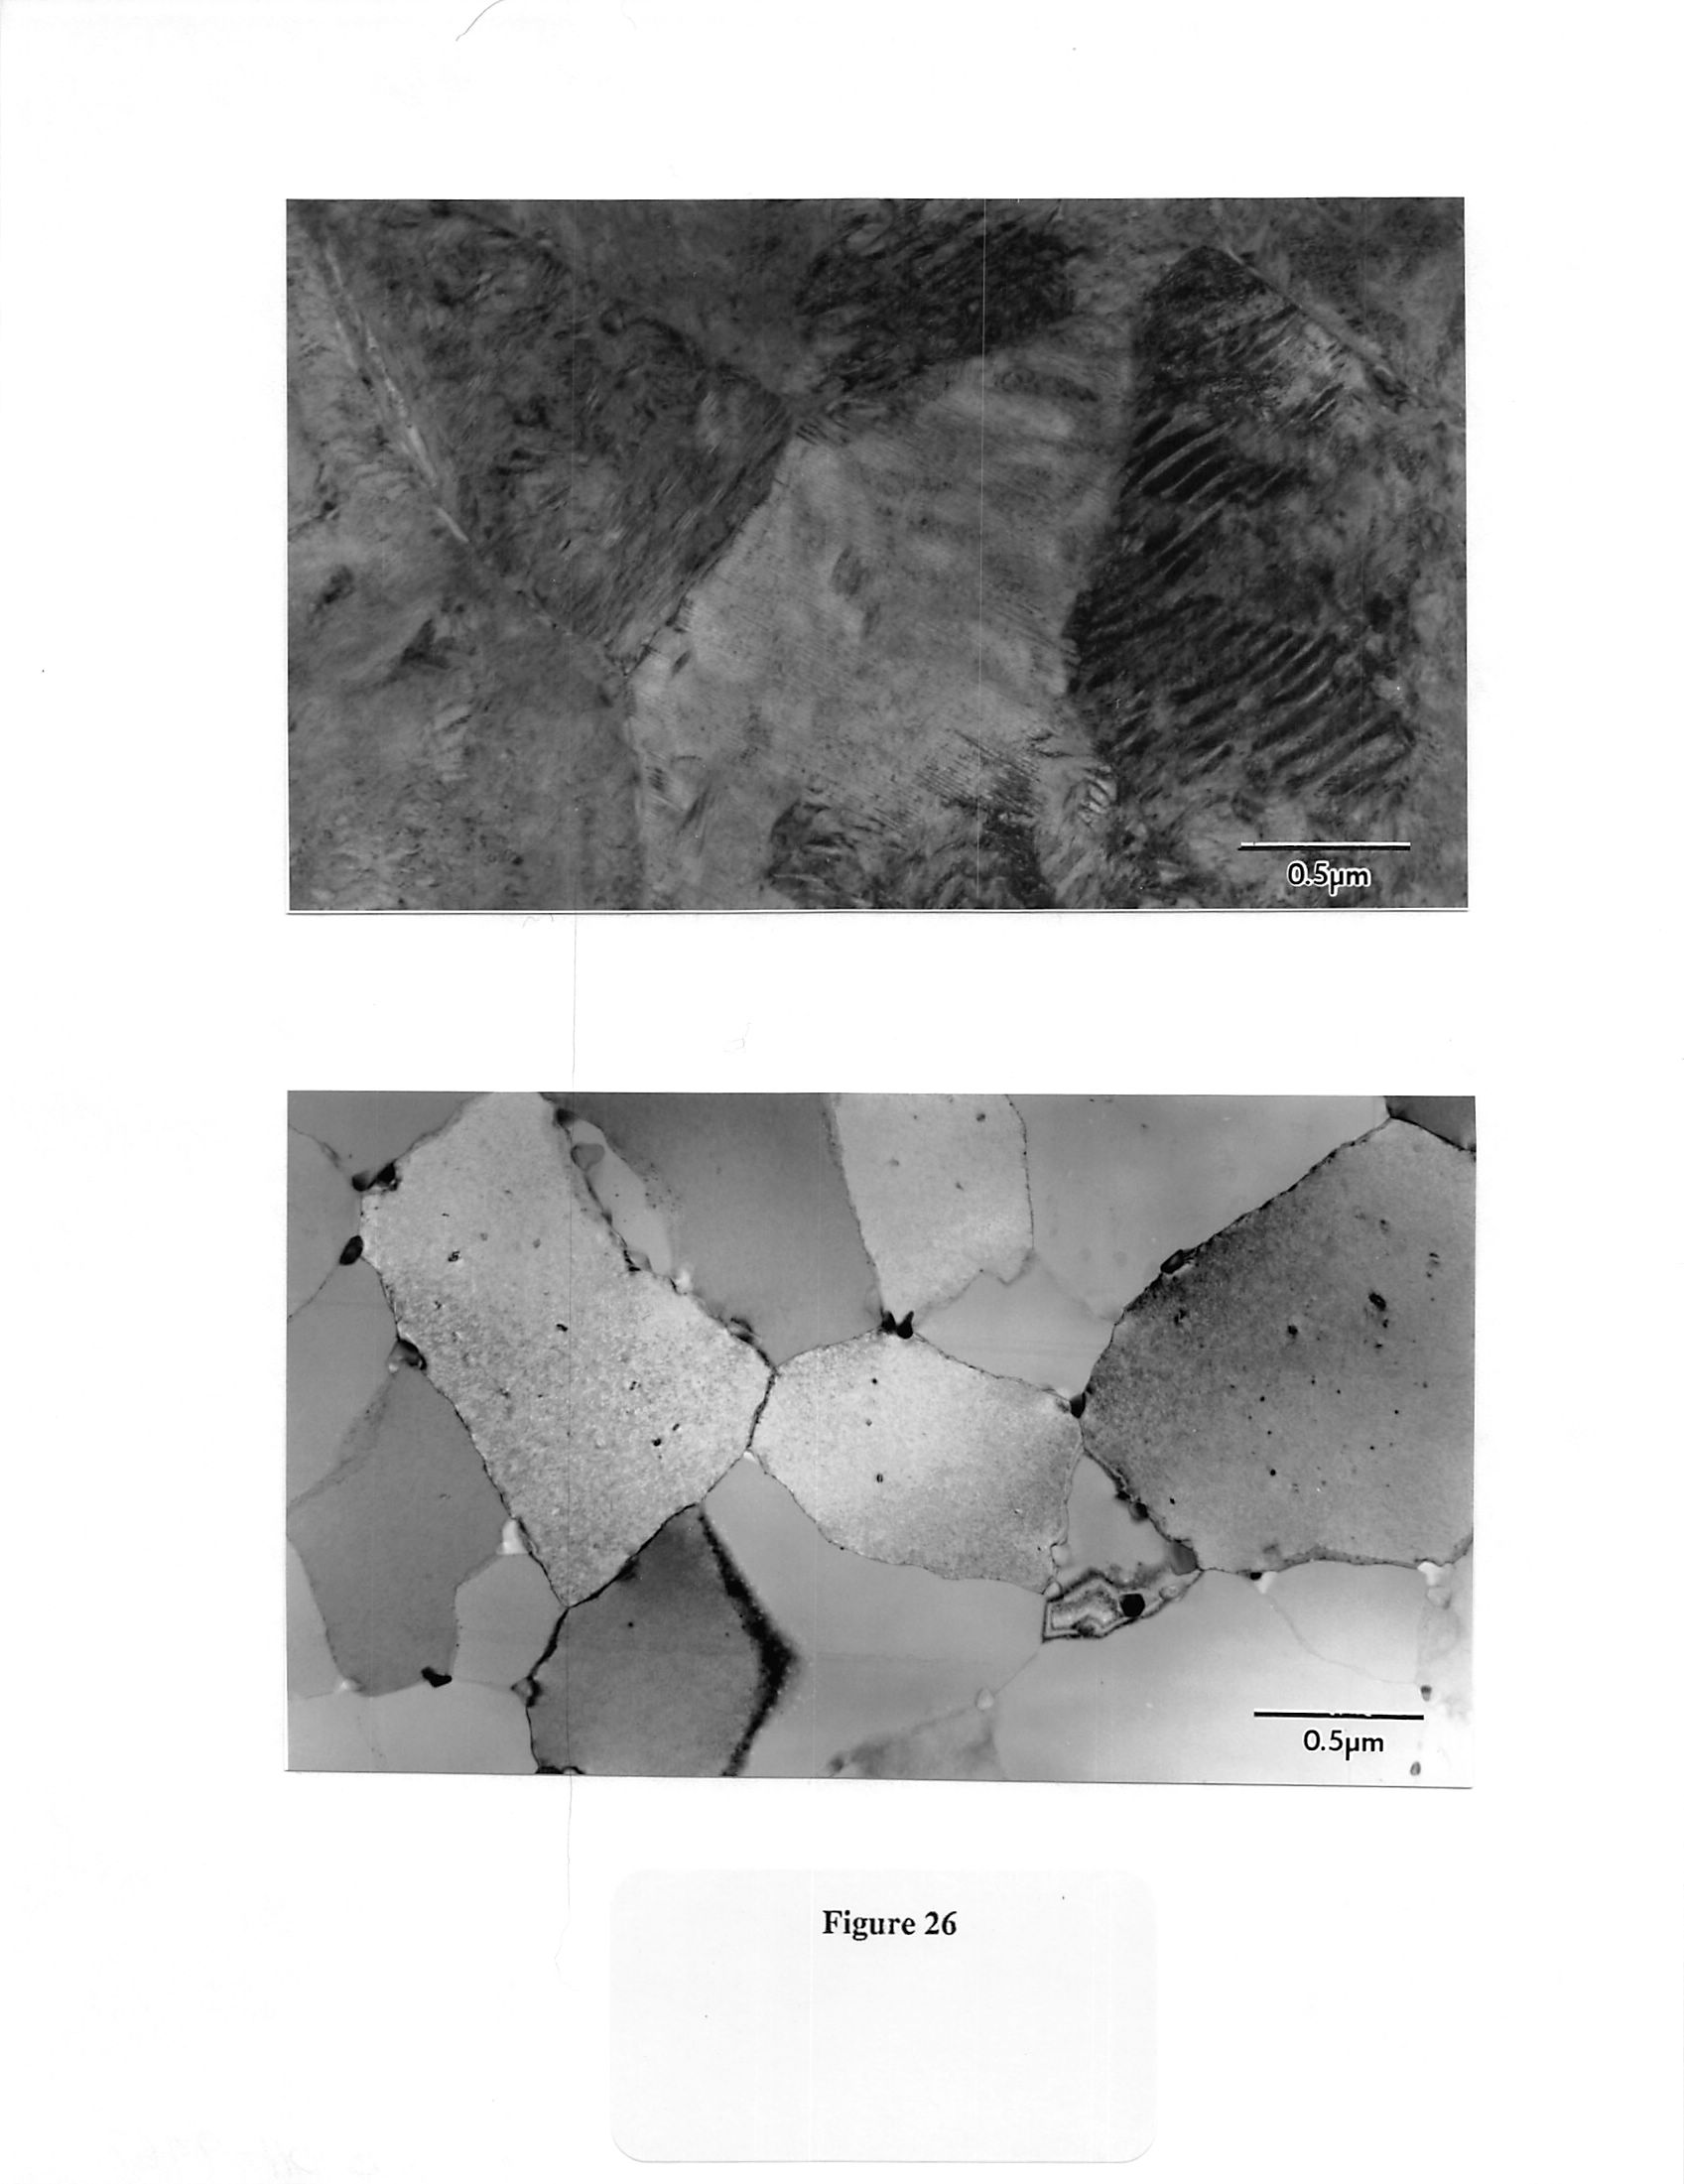 Transmission electron micrograph of martersitic and austenitic TiNi crystals